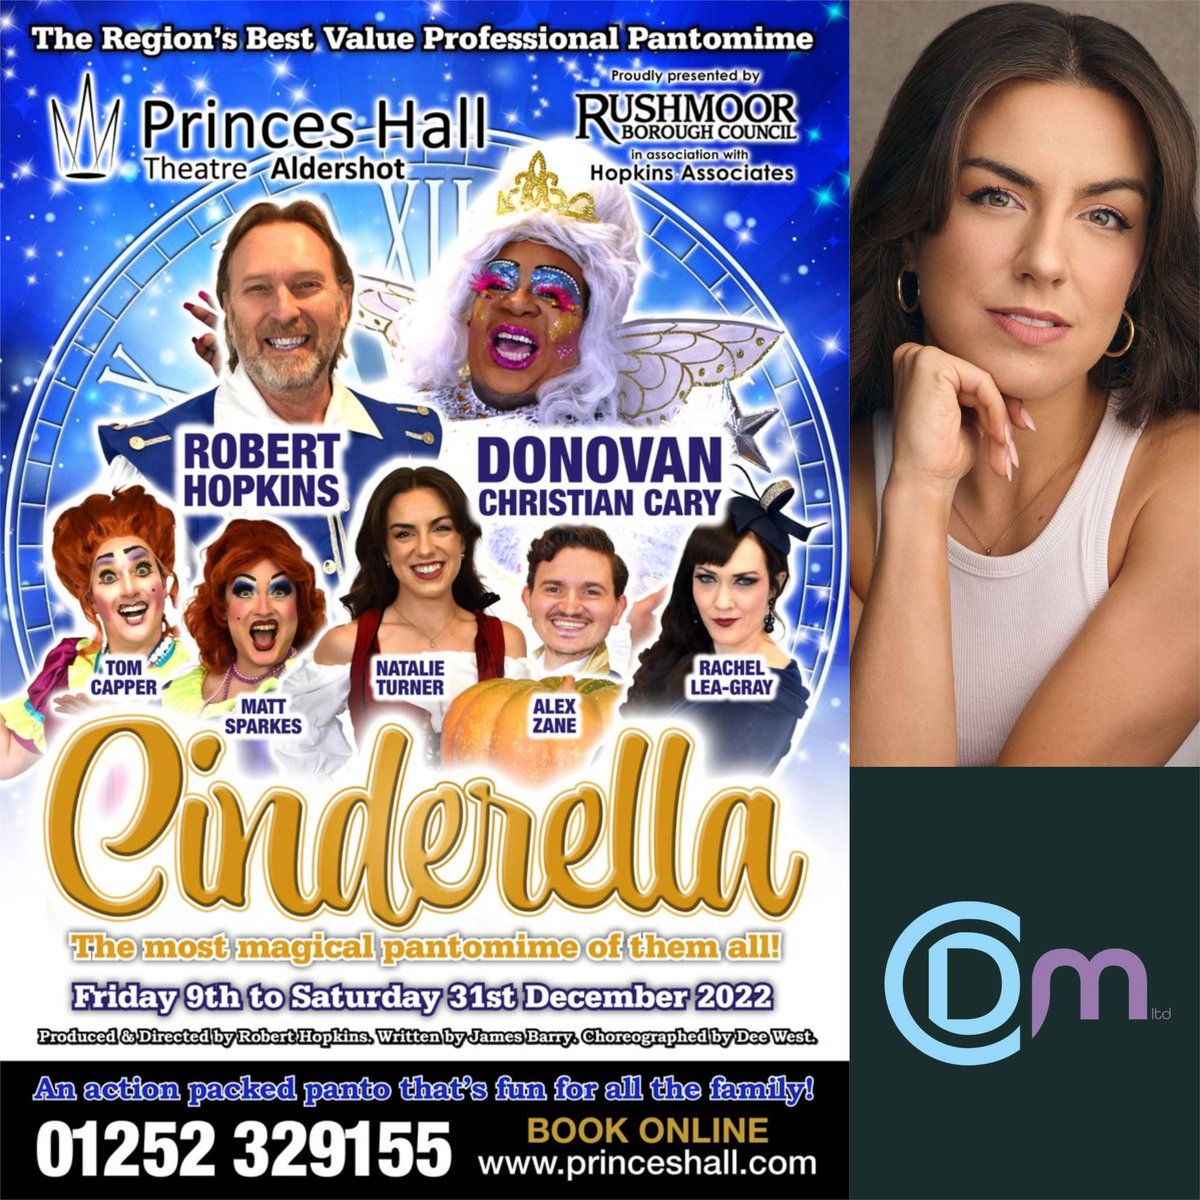 Break a leg to client NATALIE TURNER (@NatsTurner19) who opens today as the title role in Cinderella at the Princes Hall Theatre, Aldershot. The pantomime produced by Hopkins Associates runs until 31 December. @PrincesHall